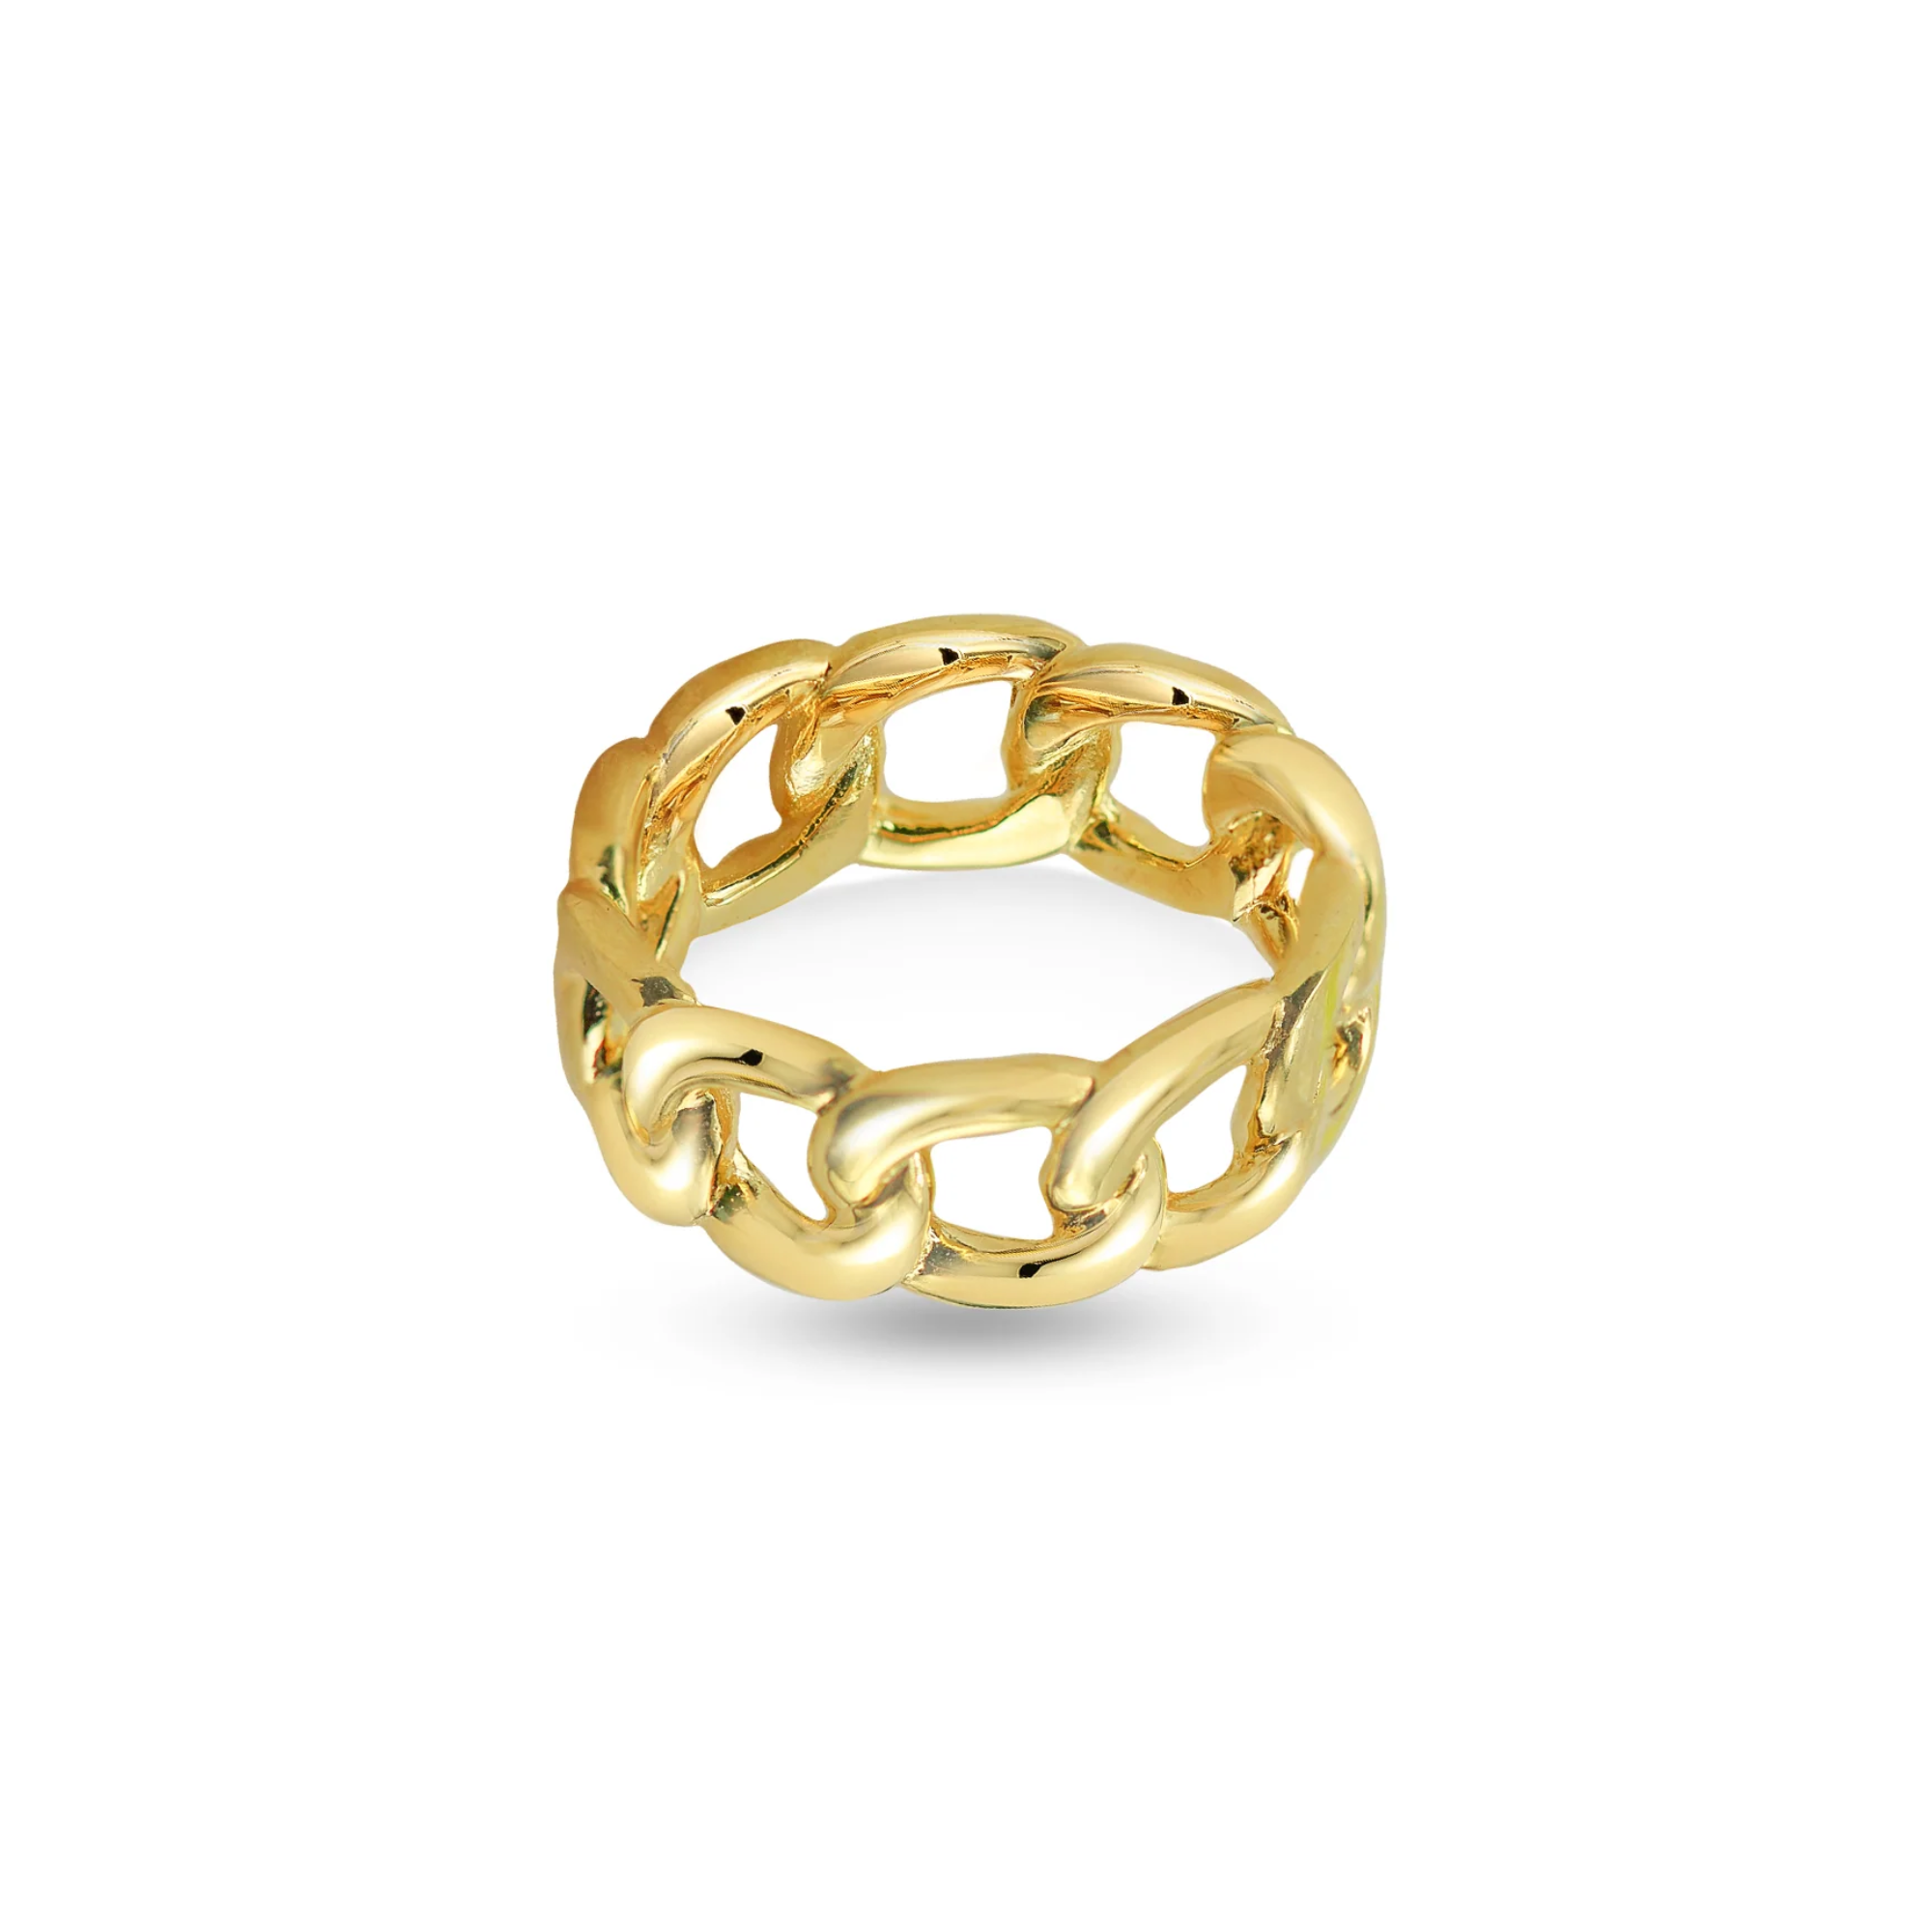 THE WIDE CHAIN RING